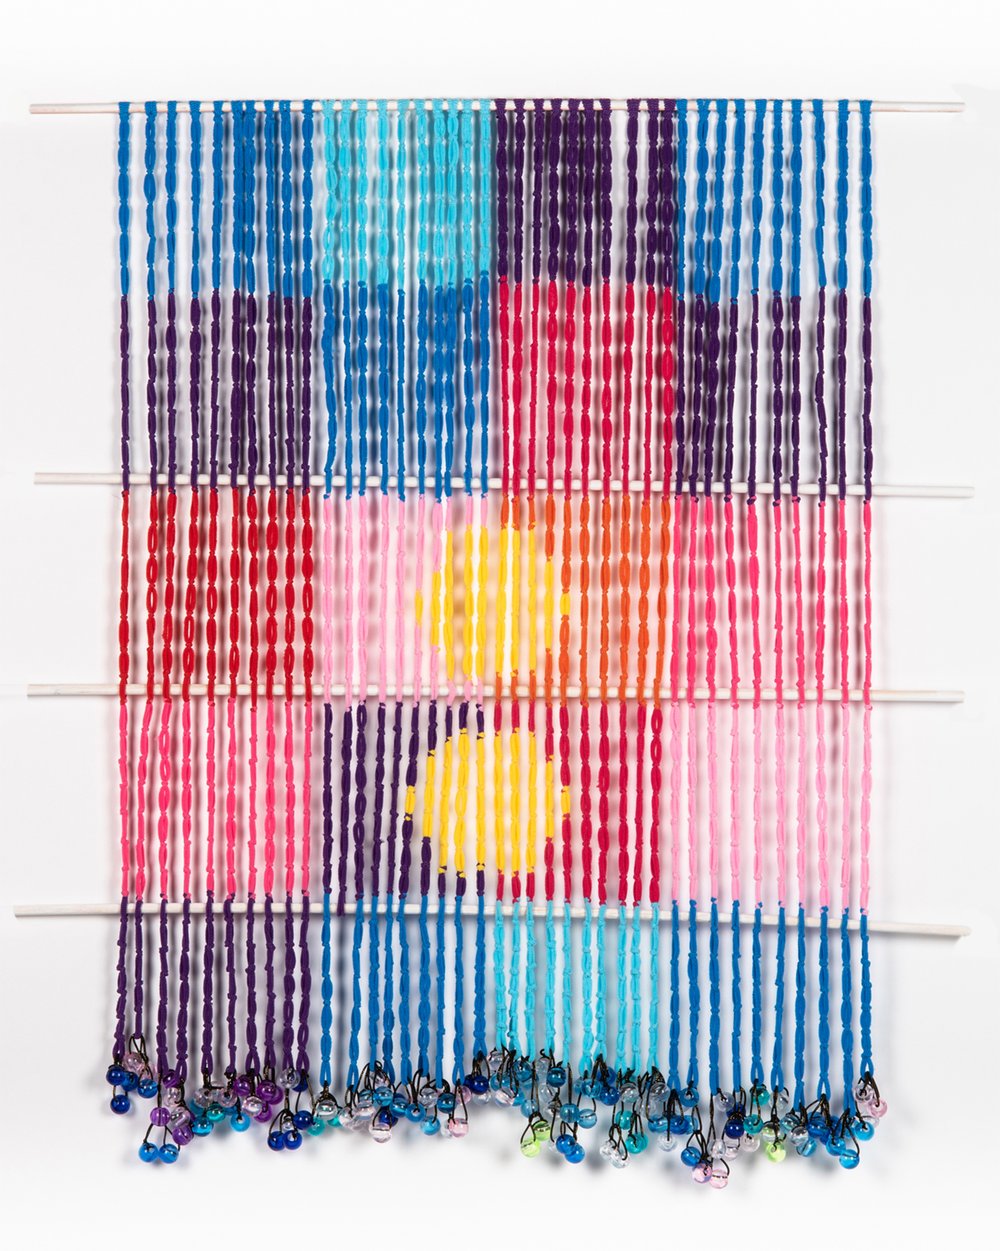  Quinci Baker,  Untitled (Quilt) , 2020, Harties, bobbles, acrylic rods, 54 x 24 inches. 